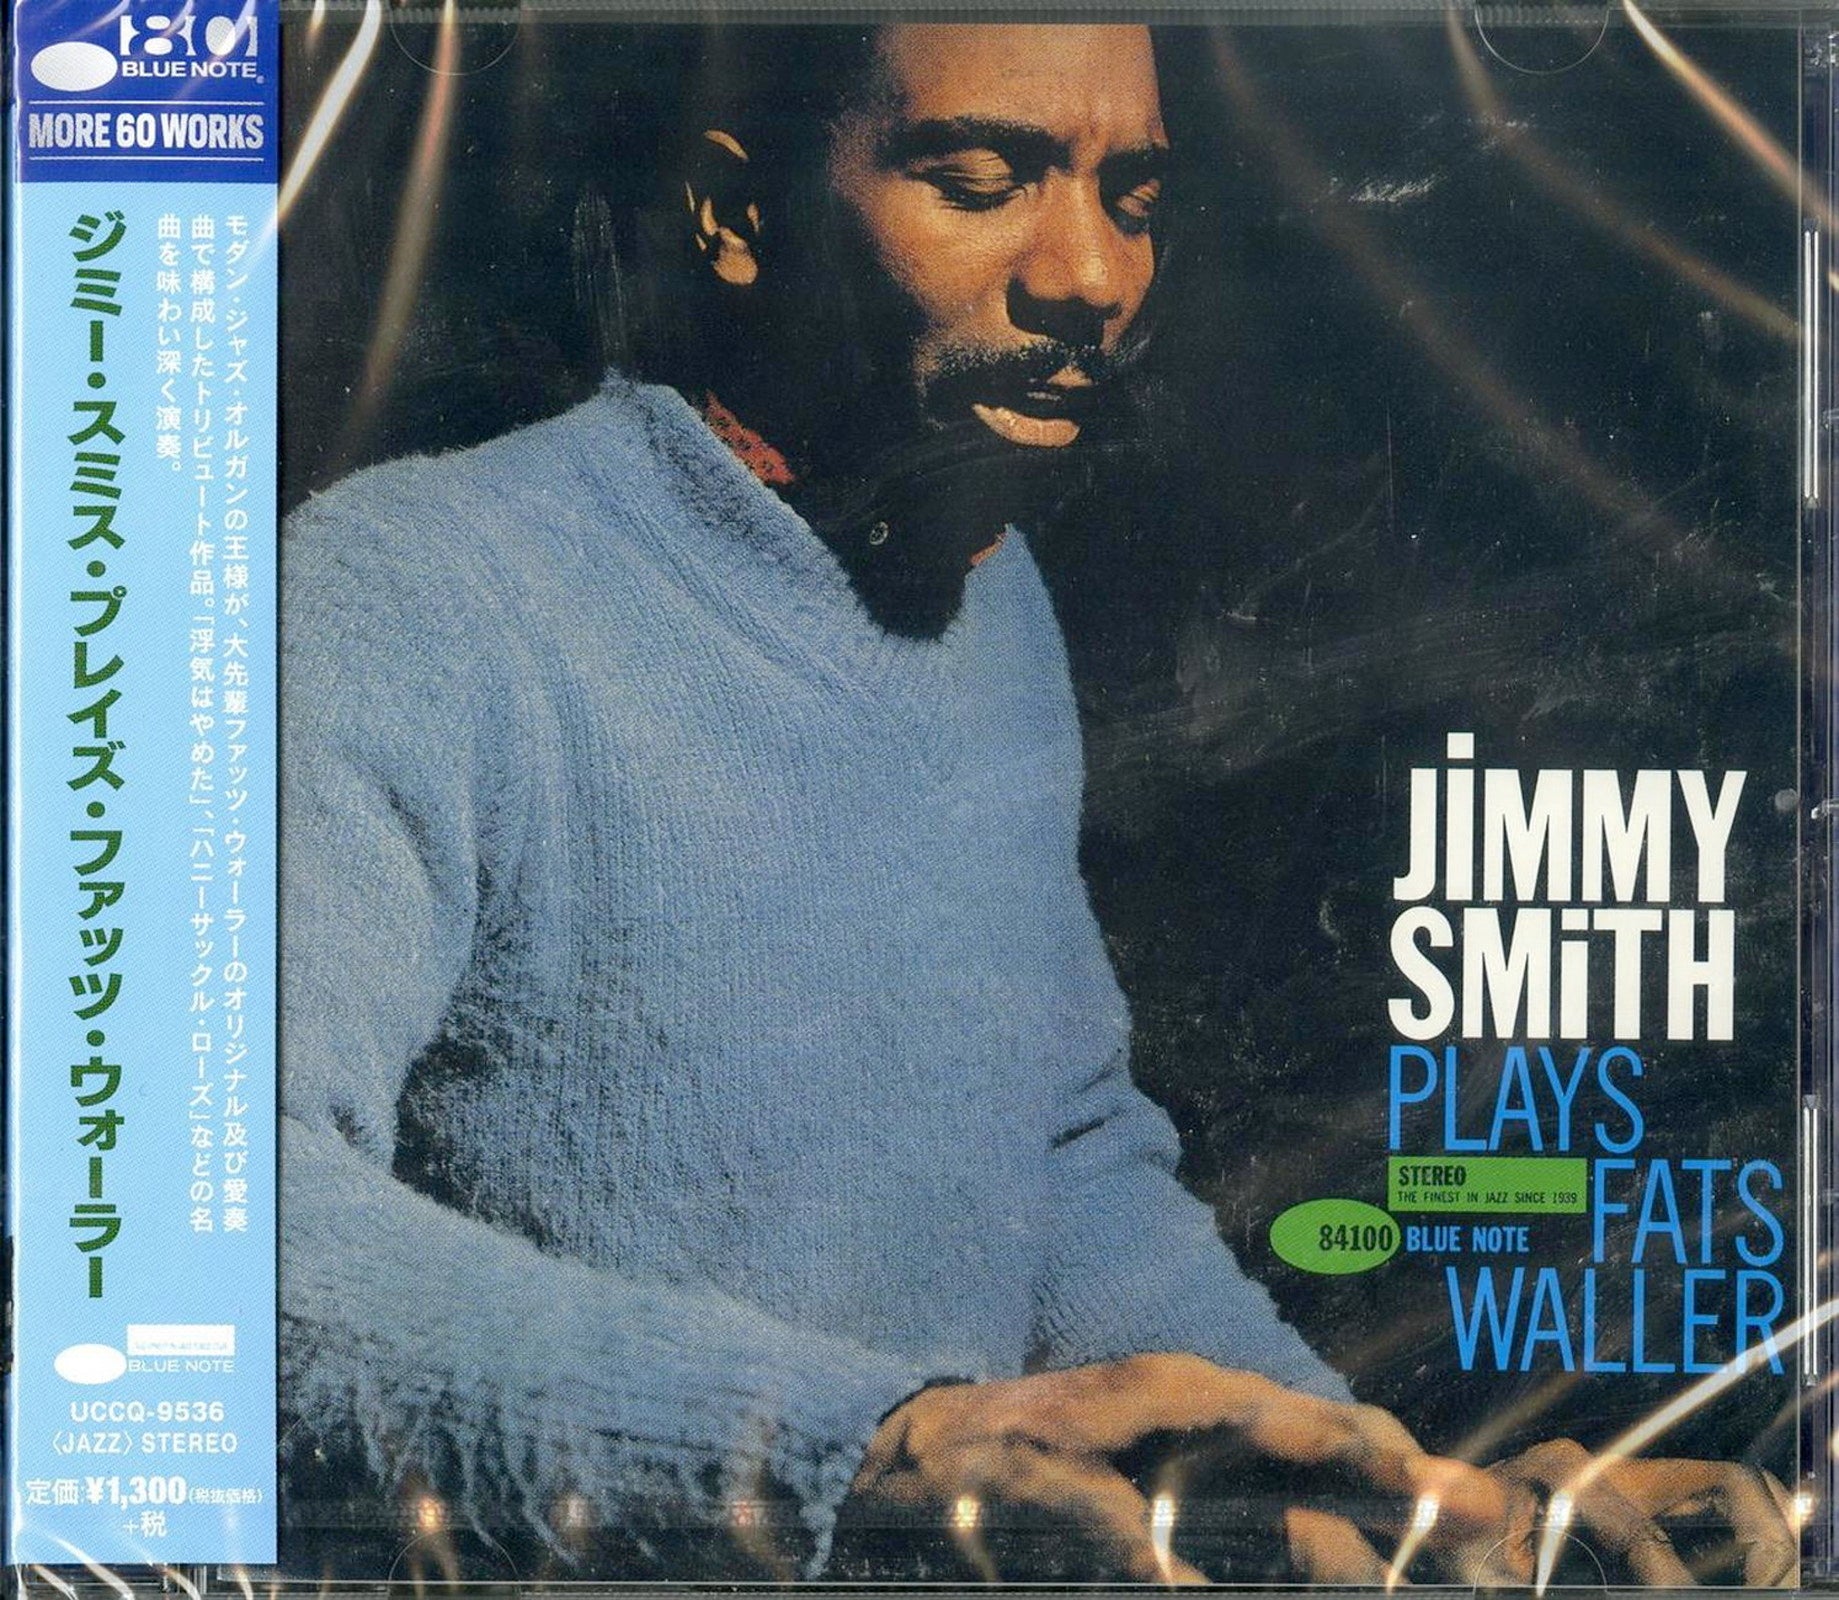 Jimmy　Store　Jimmy　Plays　Fats　year:　2019)　Japan　Waller　Smith　Jap　Vinyl　–　CDs　Smith　(Release